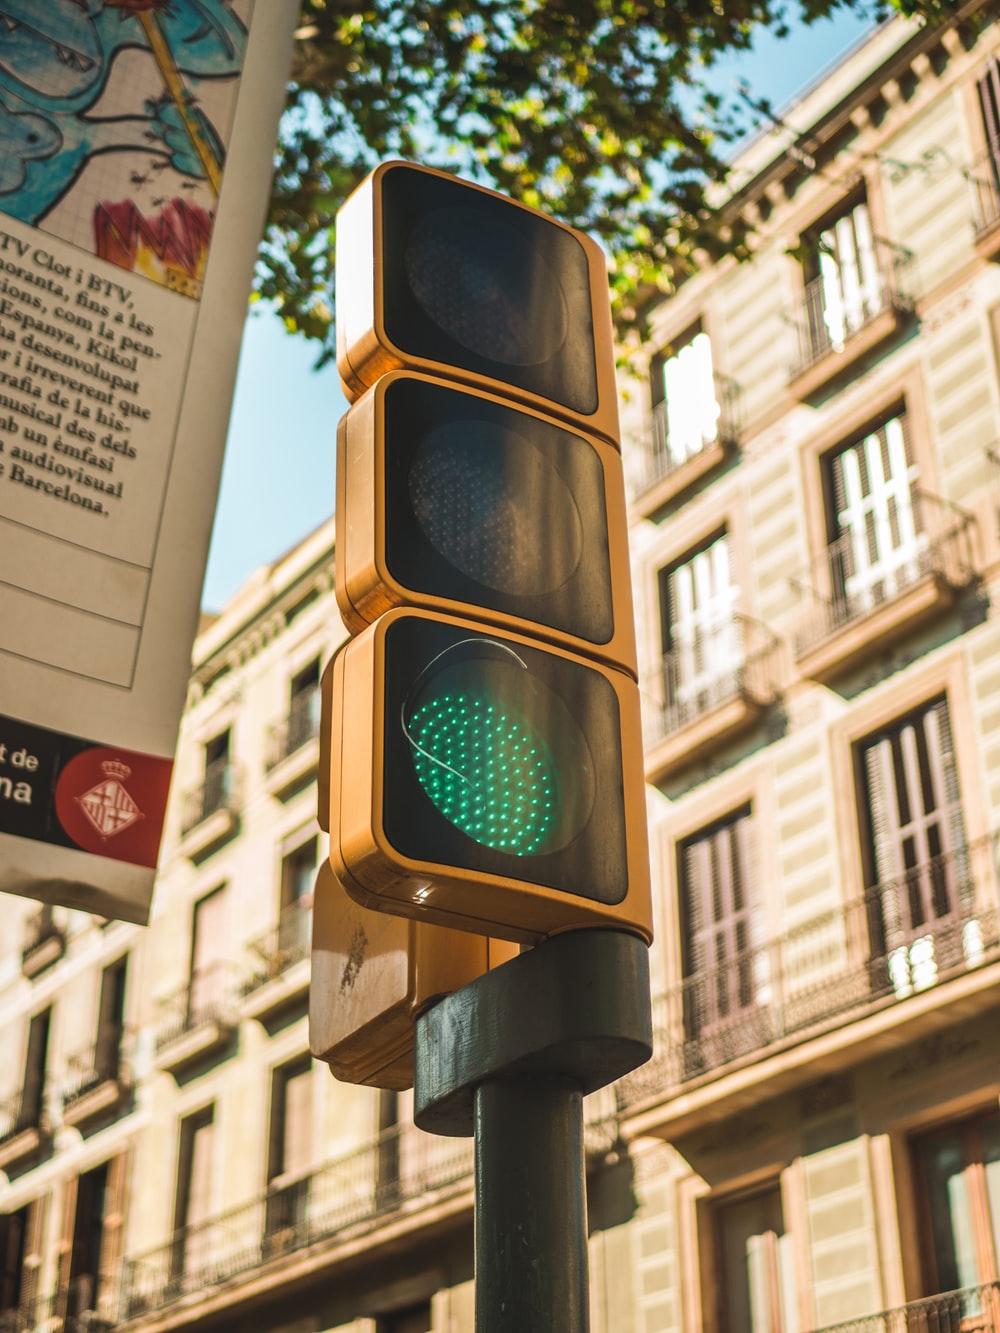 Green Traffic Light Picture. Download Free Image